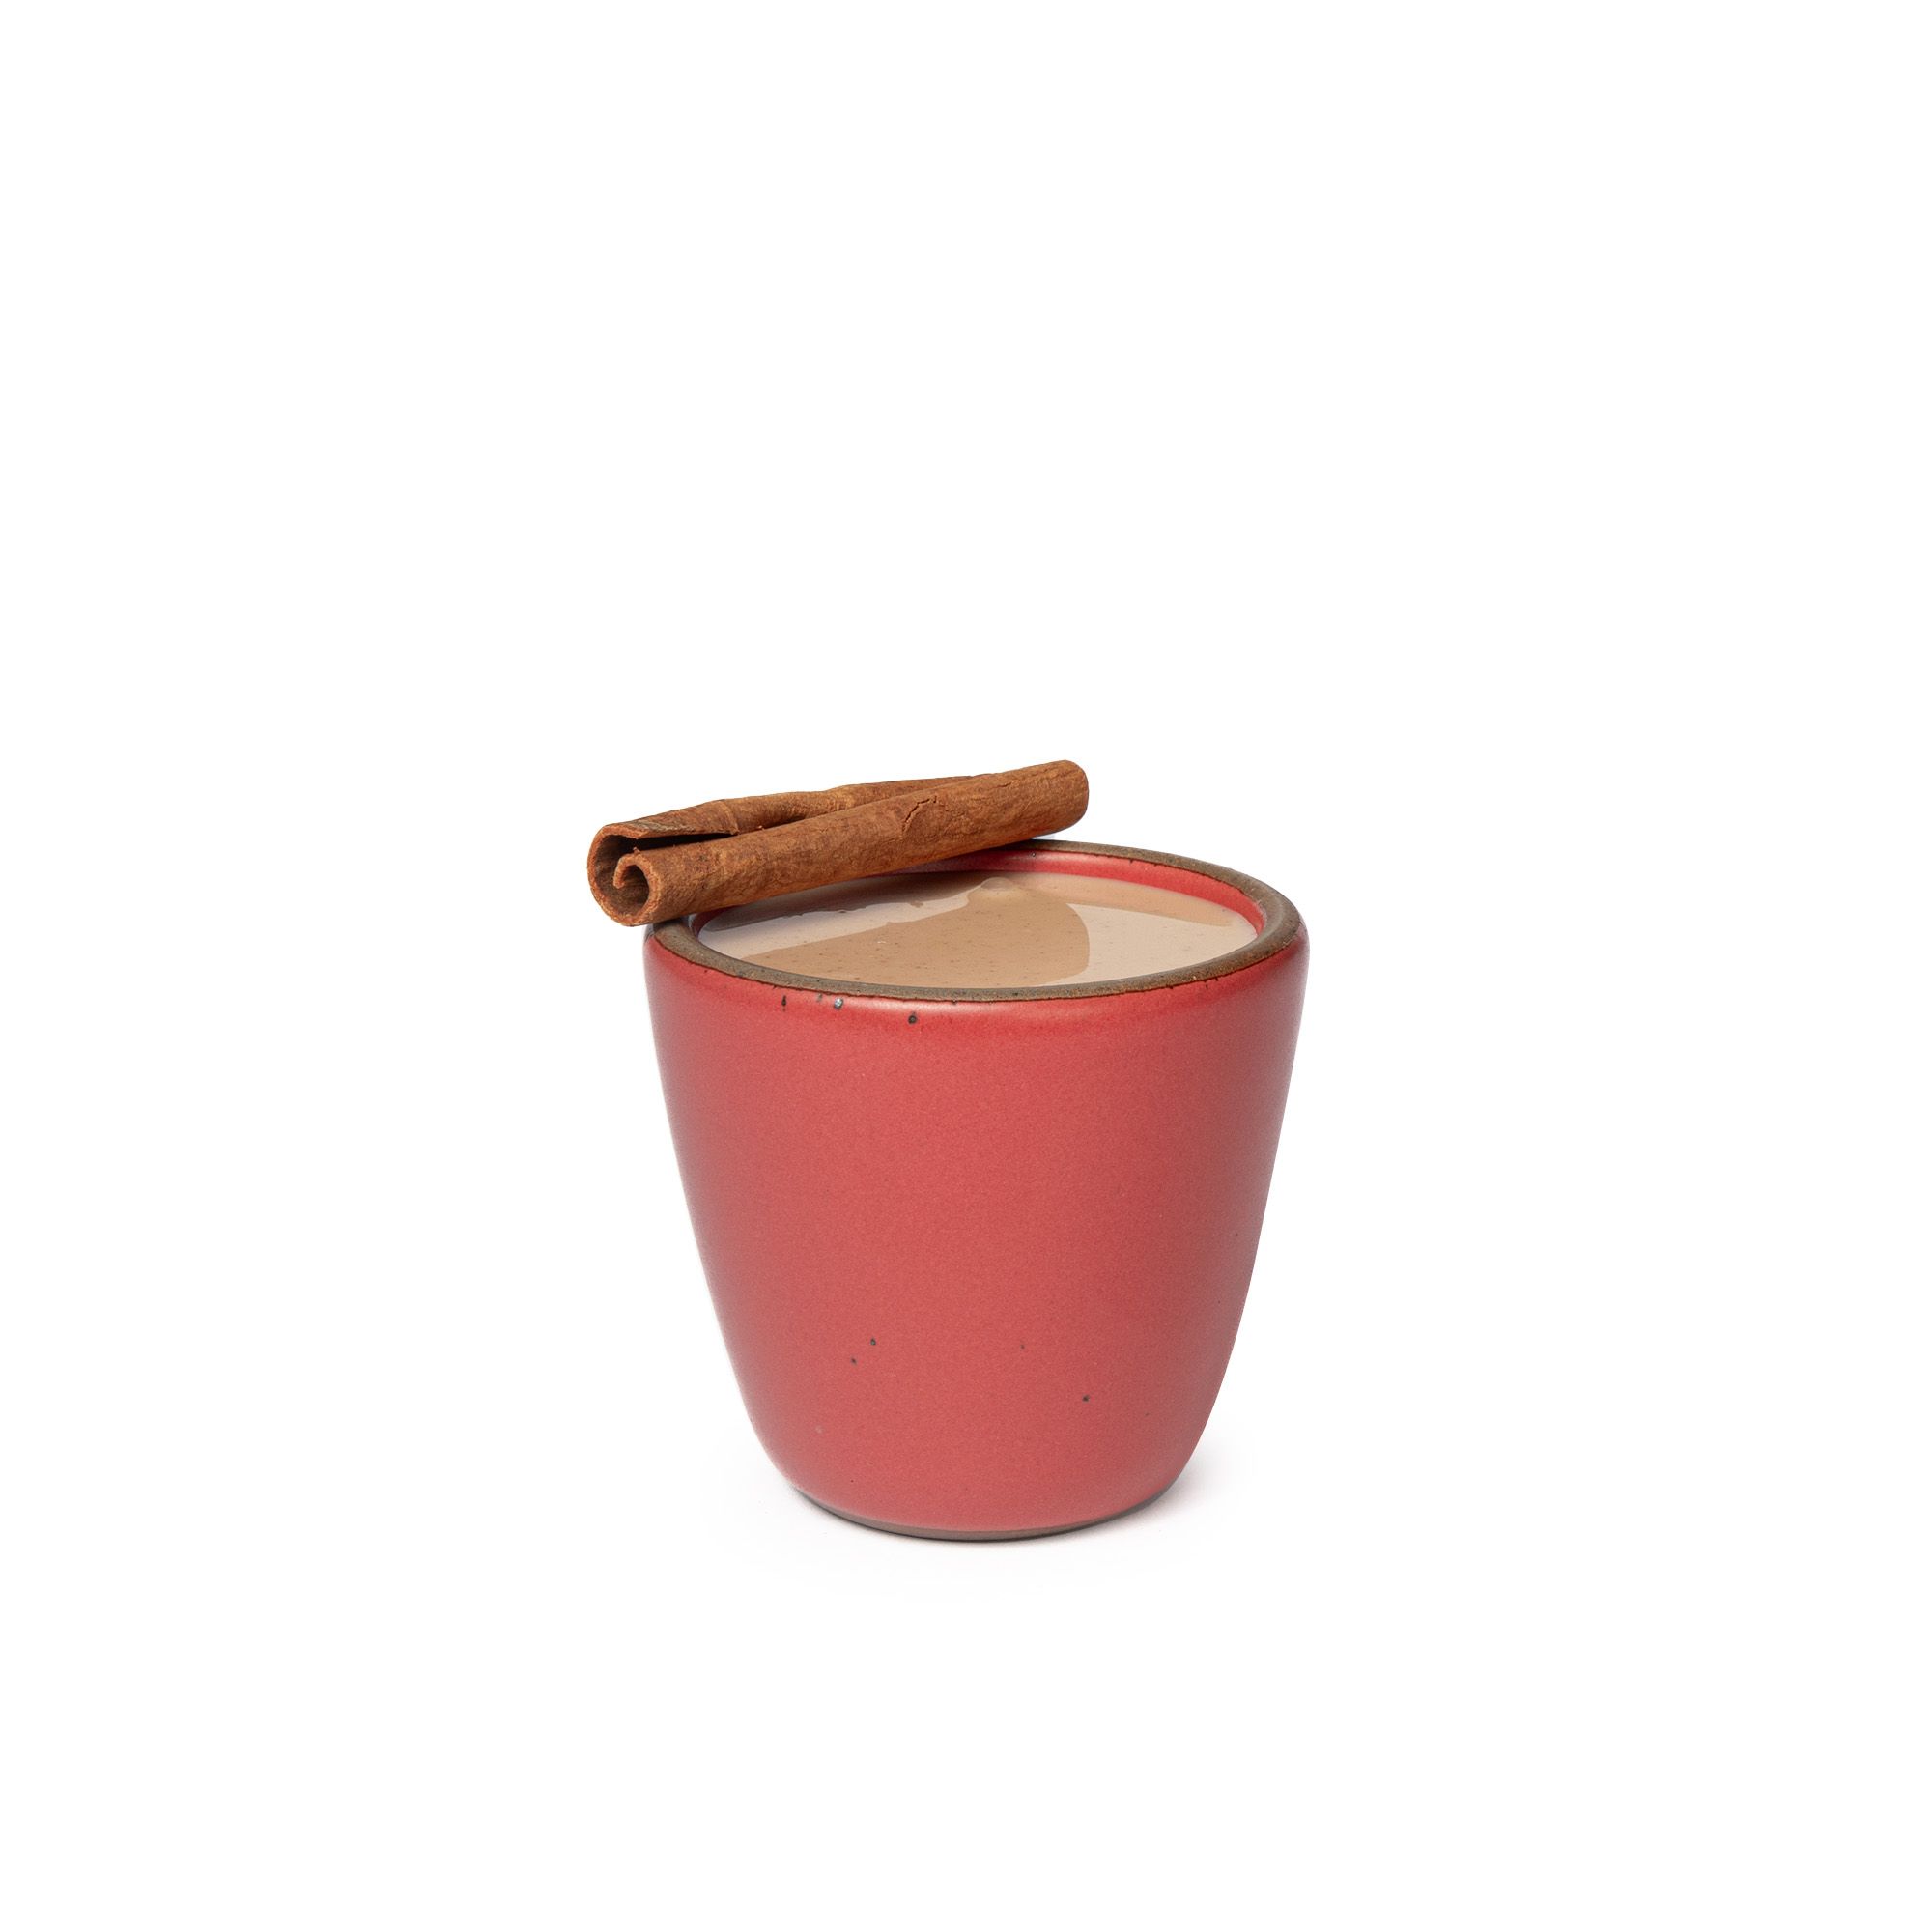 A short cup that tapers out to get wider at the top in a bold red color featuring iron speckles. The cup is filled with a buttered chai drink with a cinnamon stick on top. 